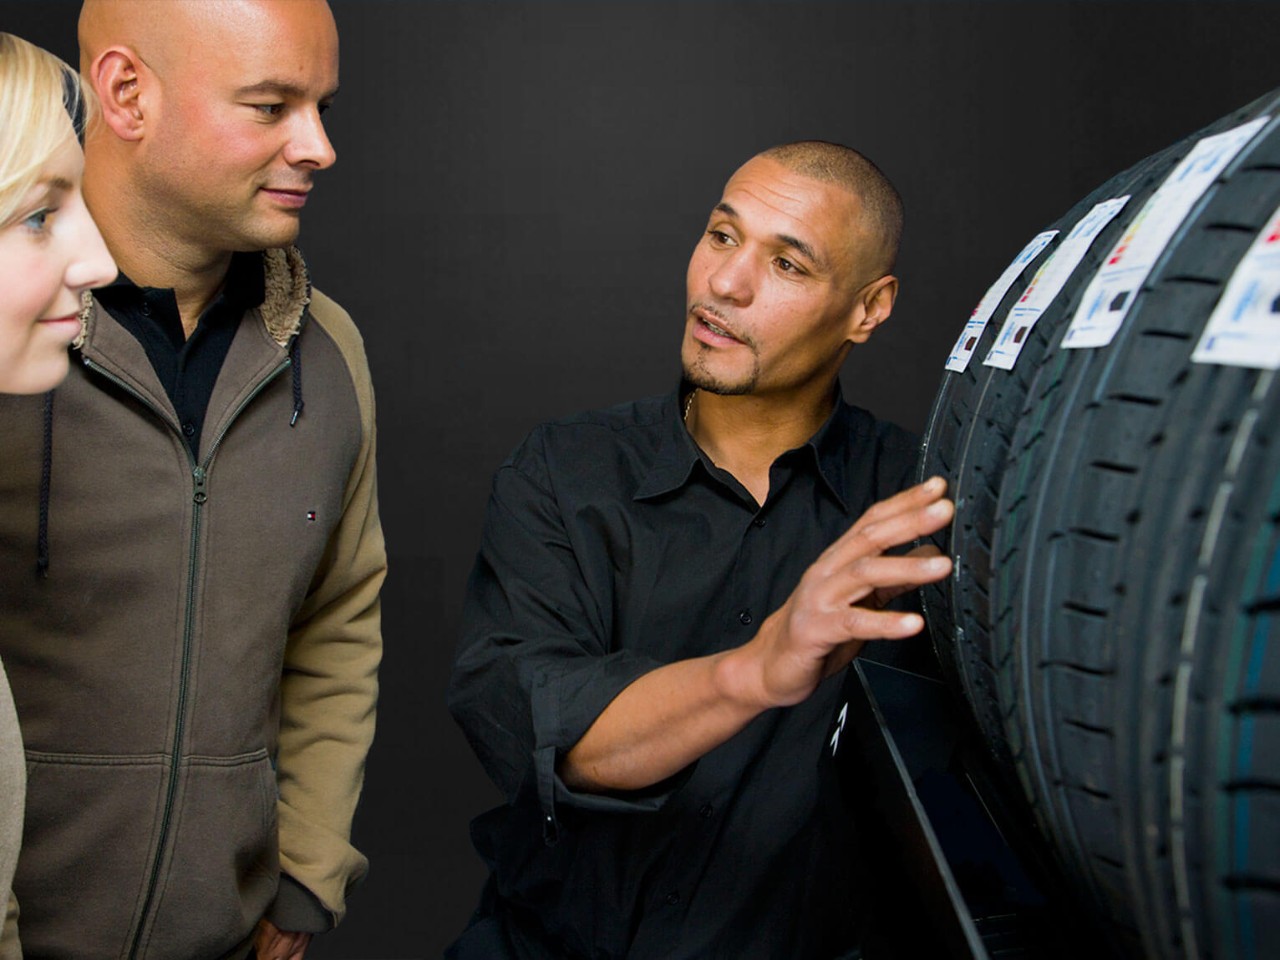 Retailer explaining changing All Tyres